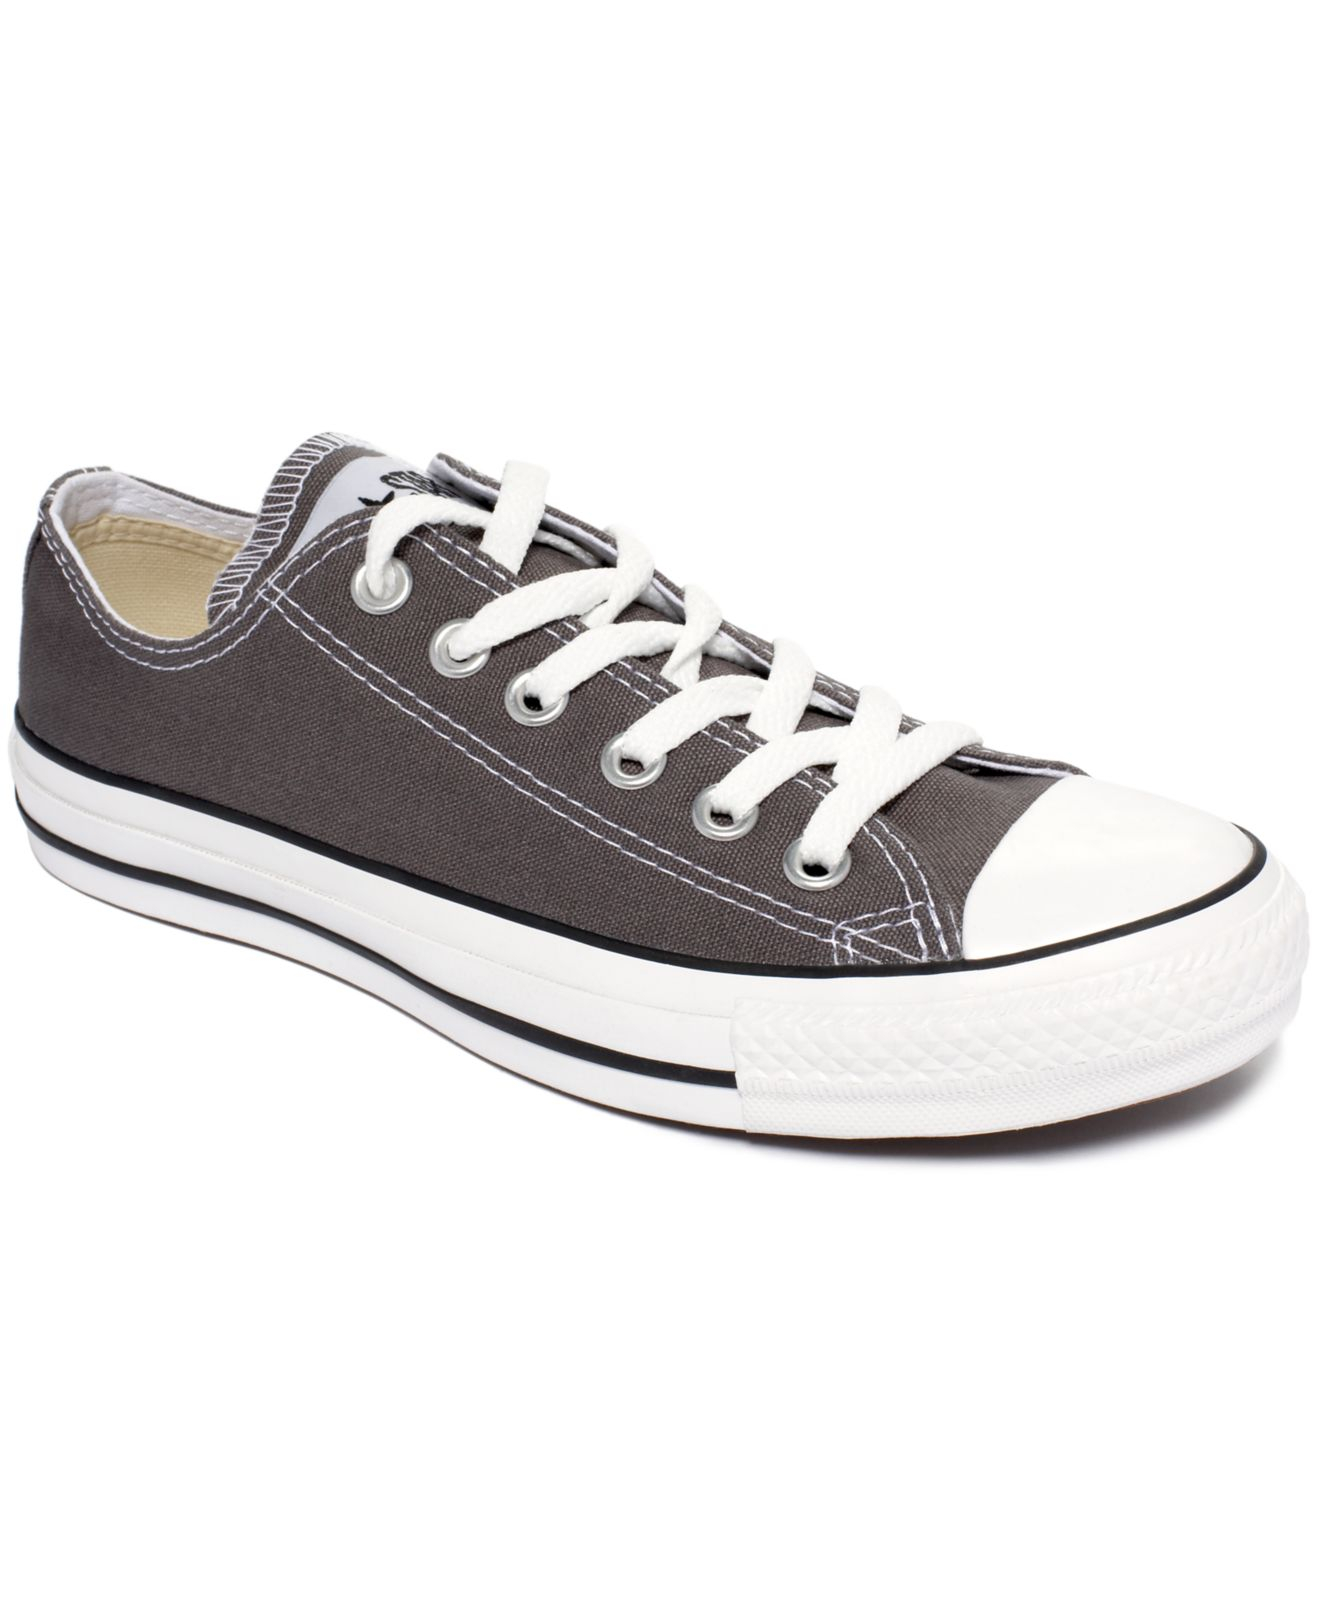 Converse Women's Chuck Taylor All Star Oxford Sneakers From Finish Line ...